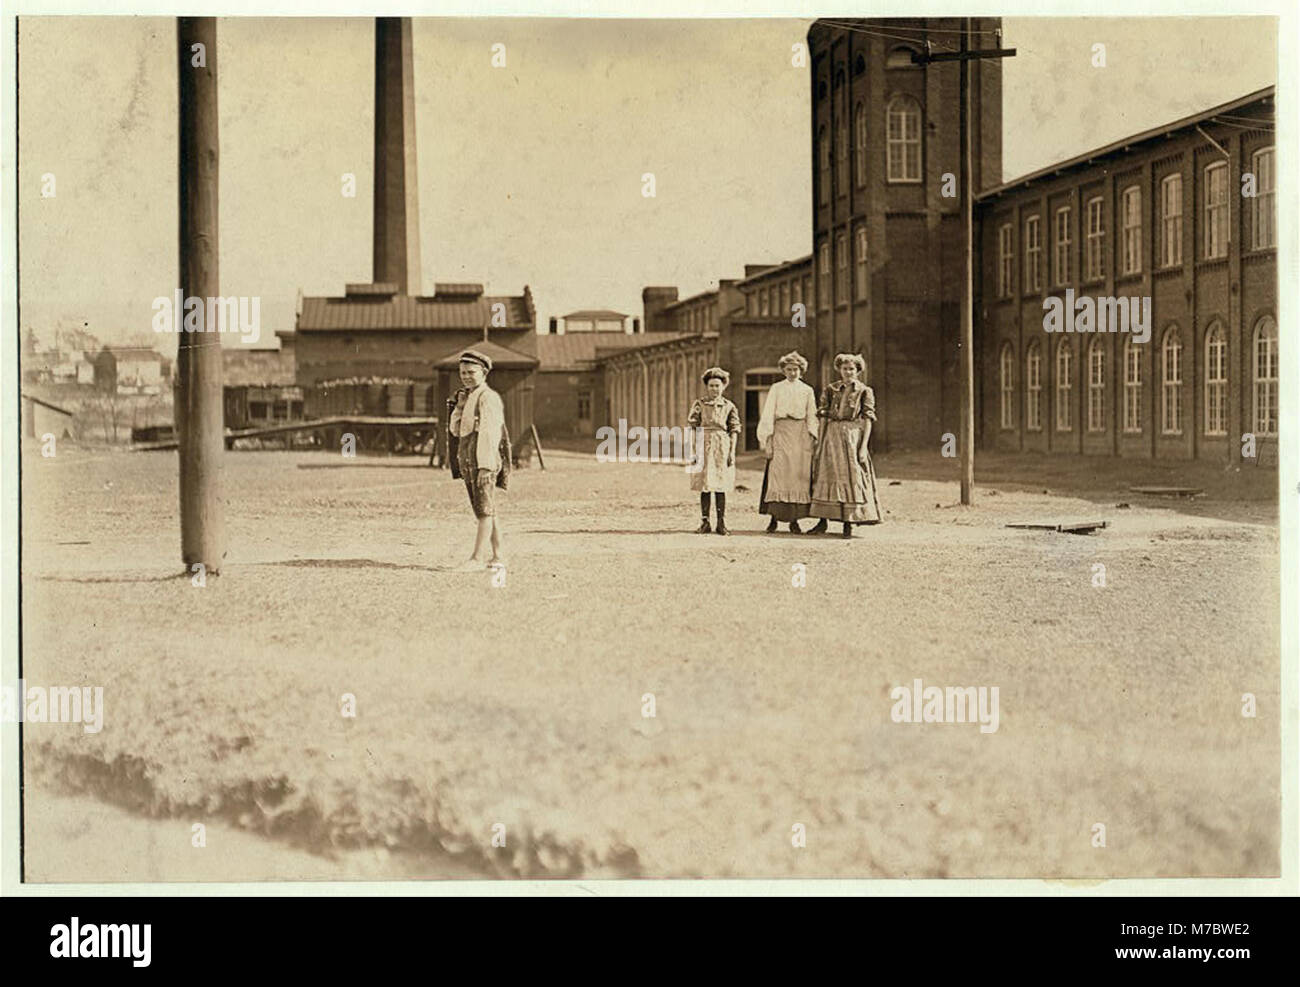 A few of the youngsters in the Manchester Cotton Mills, Macon, Ga. I was not allowed to go inside. See photos 517 to 520. LOC nclc.01611 Stock Photo